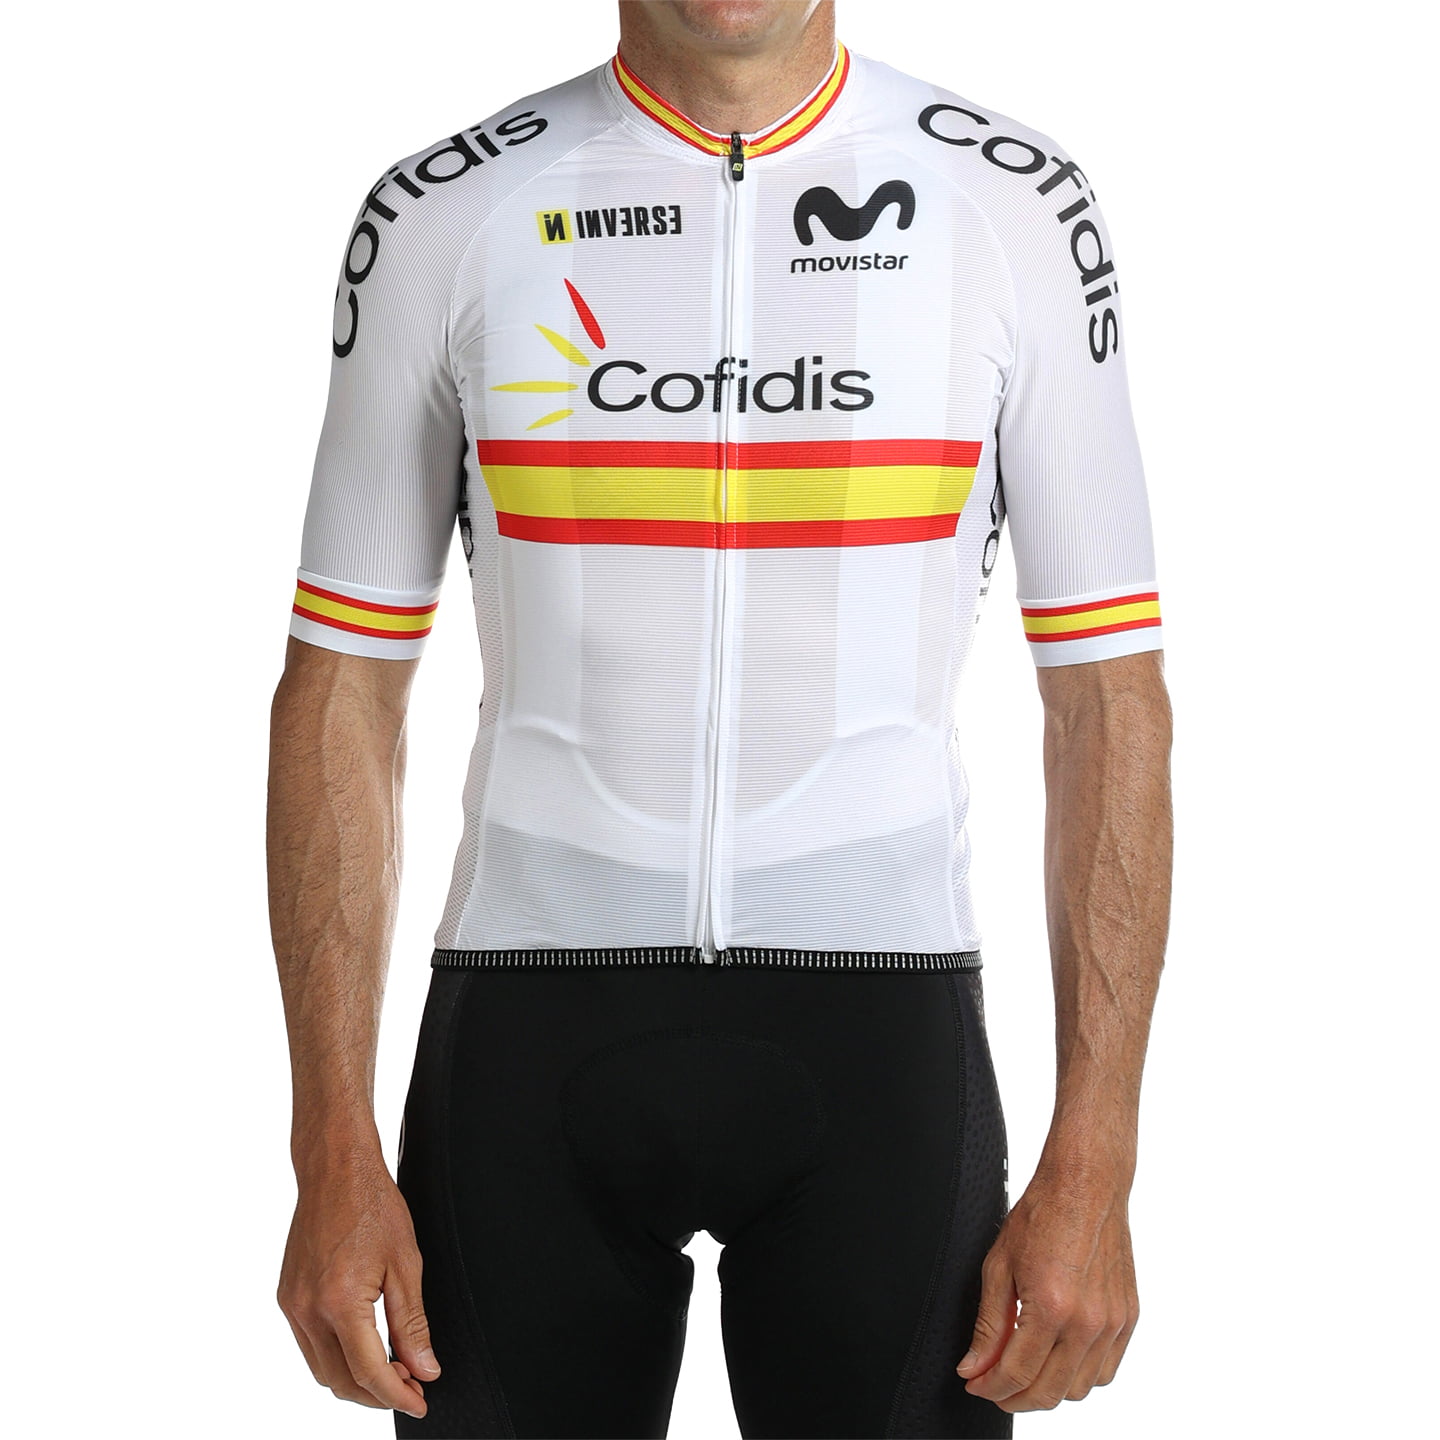 SPANISH NATIONAL TEAM 2024 Short Sleeve Jersey, for men, size S, Cycling jersey, Cycling clothing